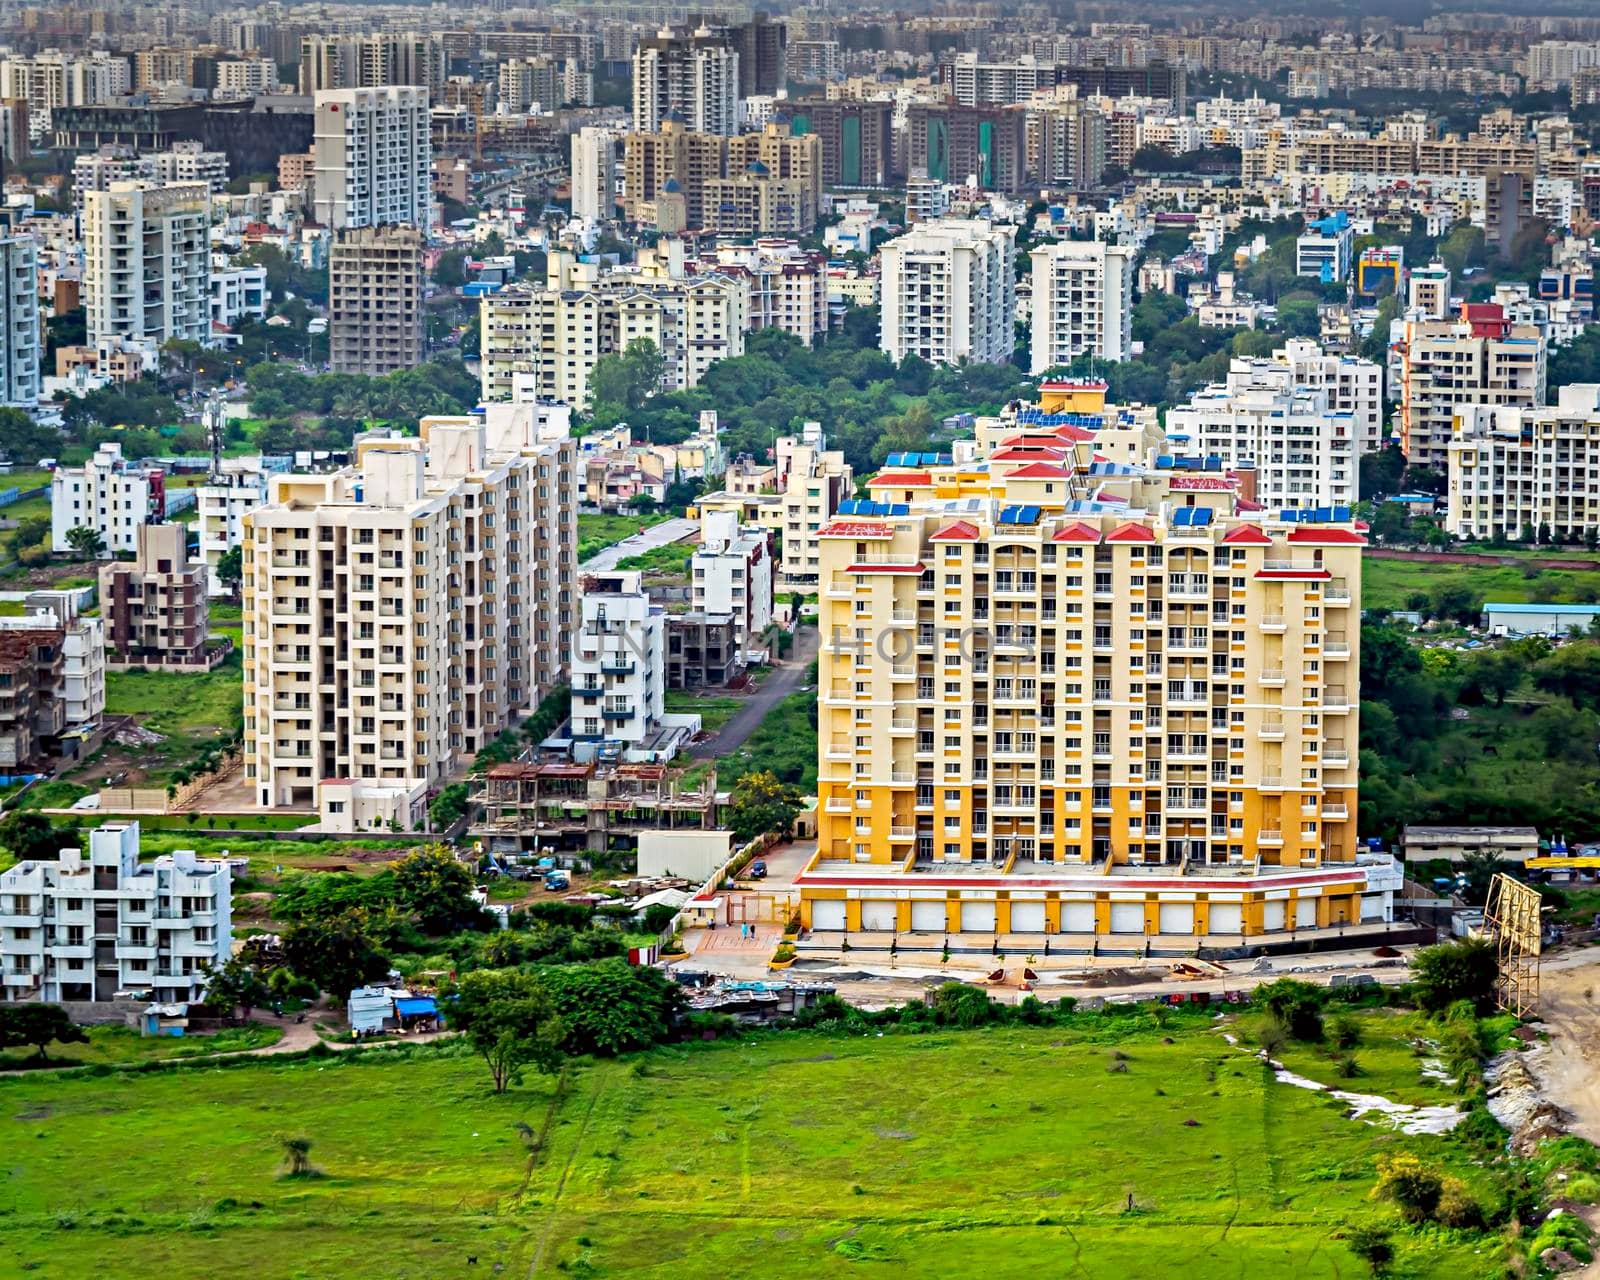 Image of tall buildings under construction near the hill in Pune, Maharashtra.